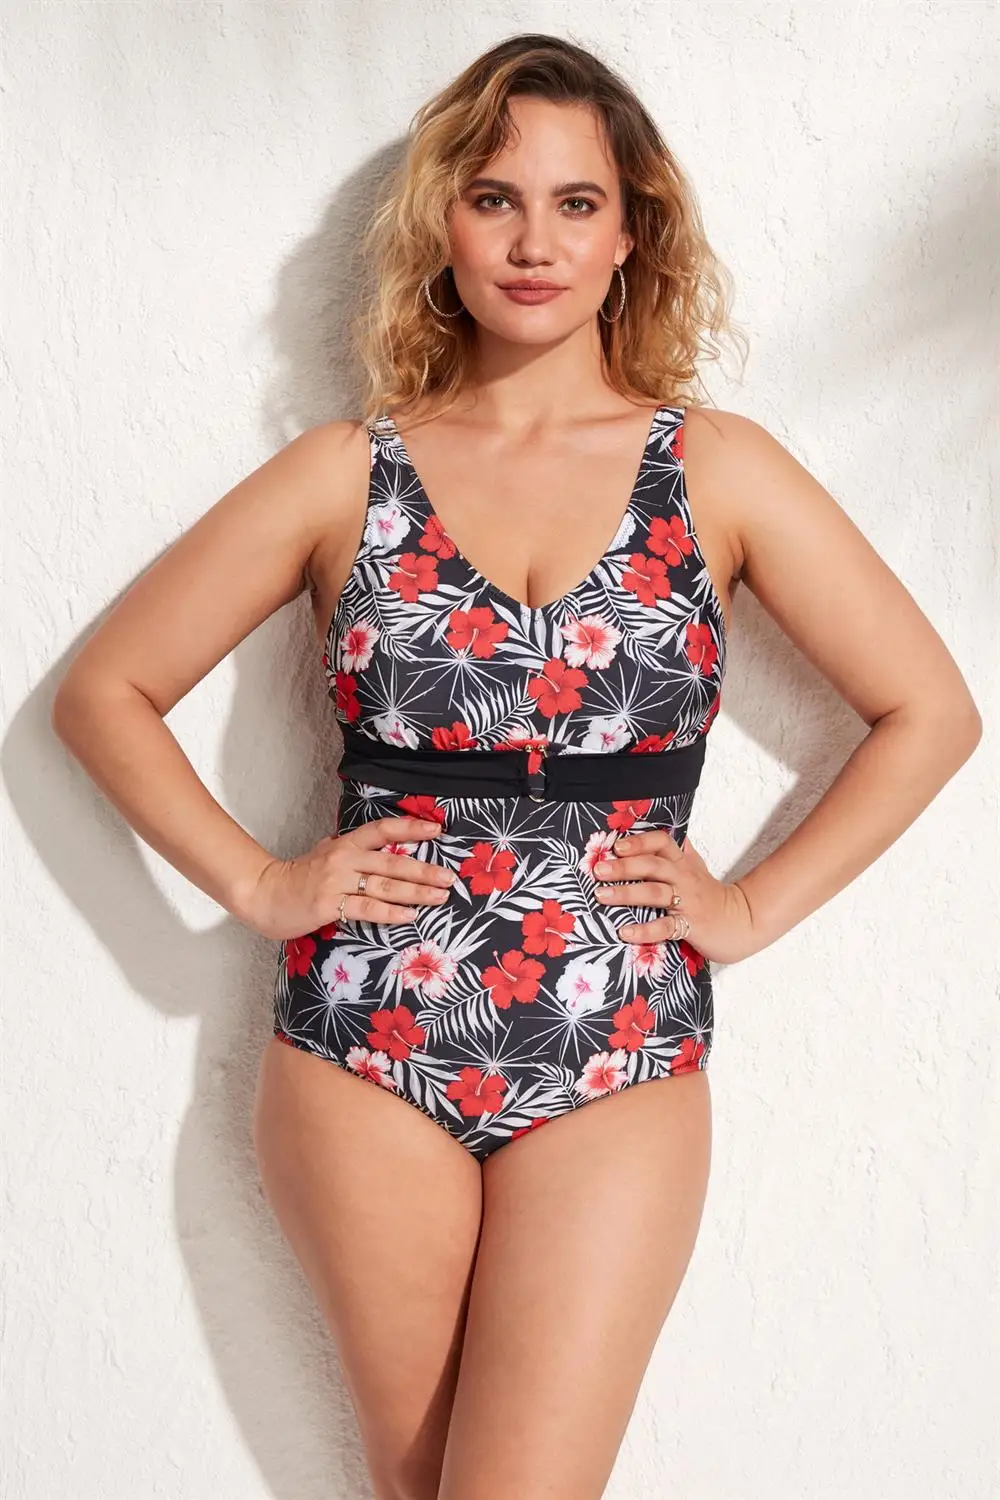 Ola Chicas Plus Size Swimwear For Women 4xl 5xl 6xl 7xl V Neck Accessory Patterned Swimsuits 2022 New Fashion Bathing Suit